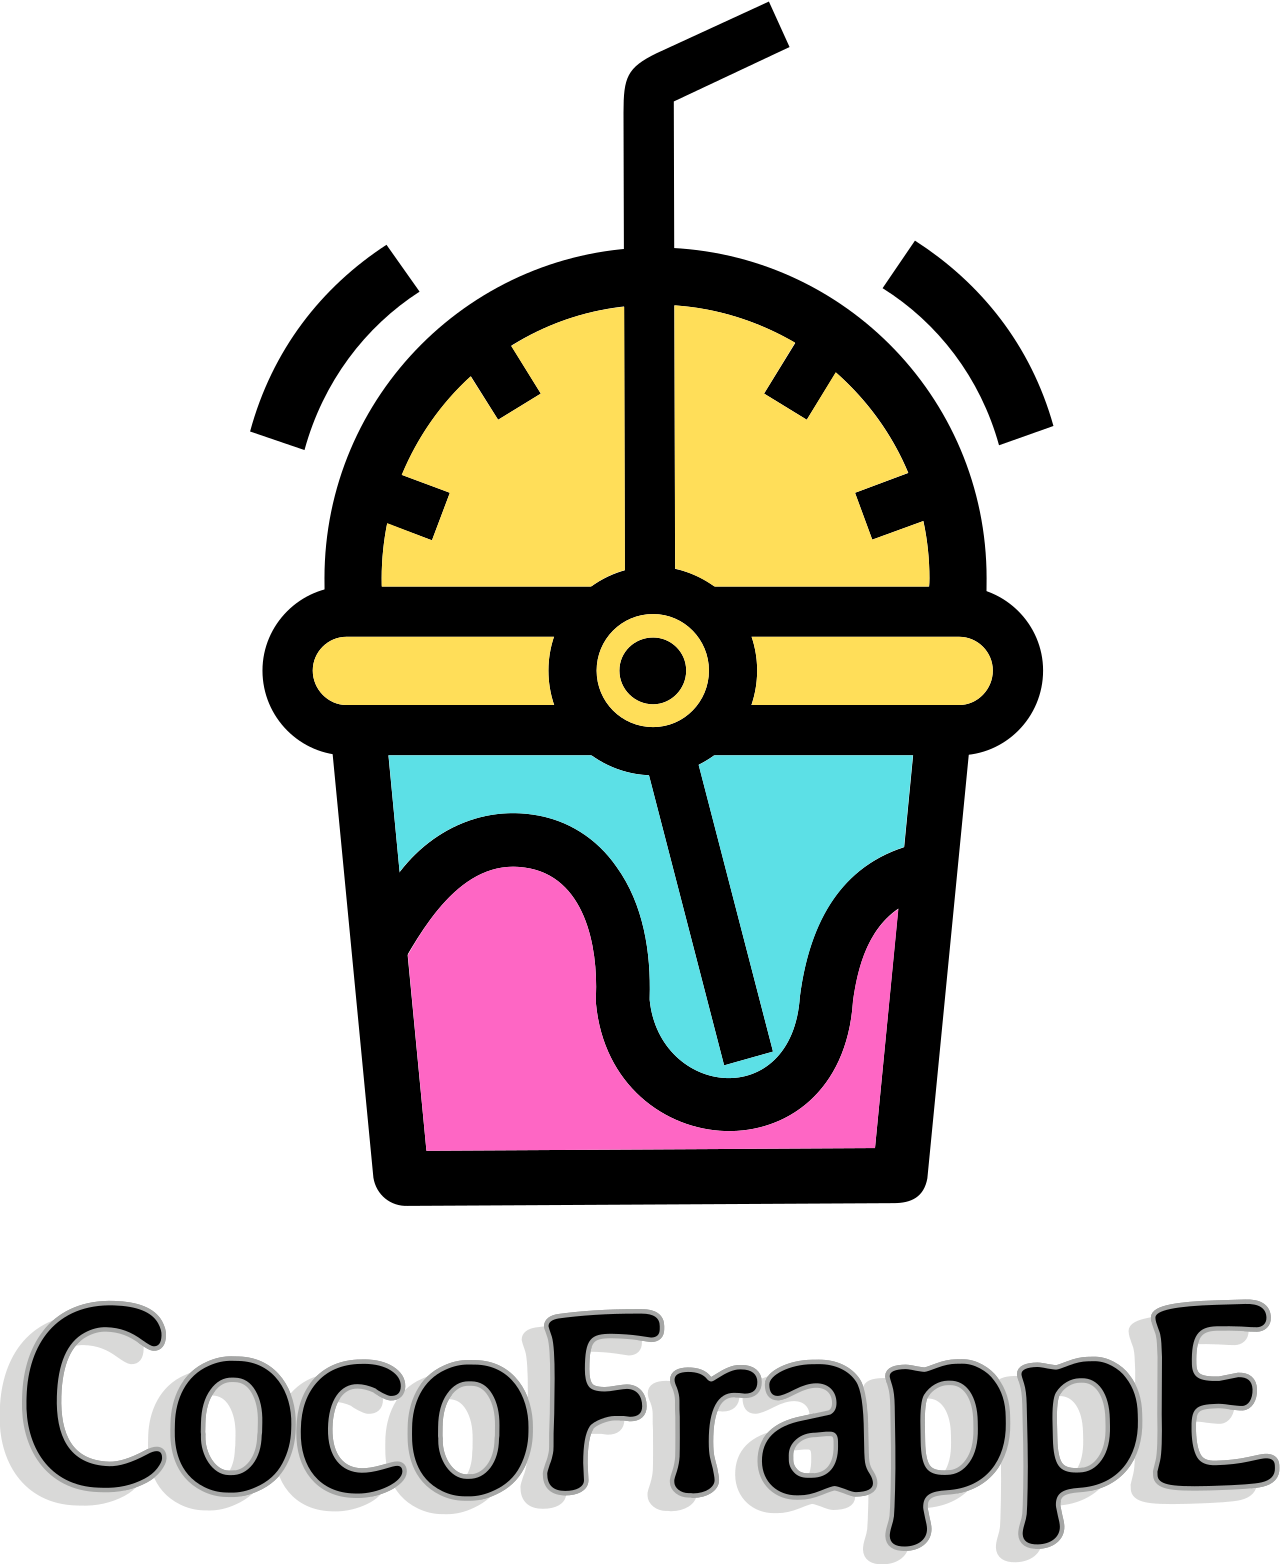 CocoFrappE's web page